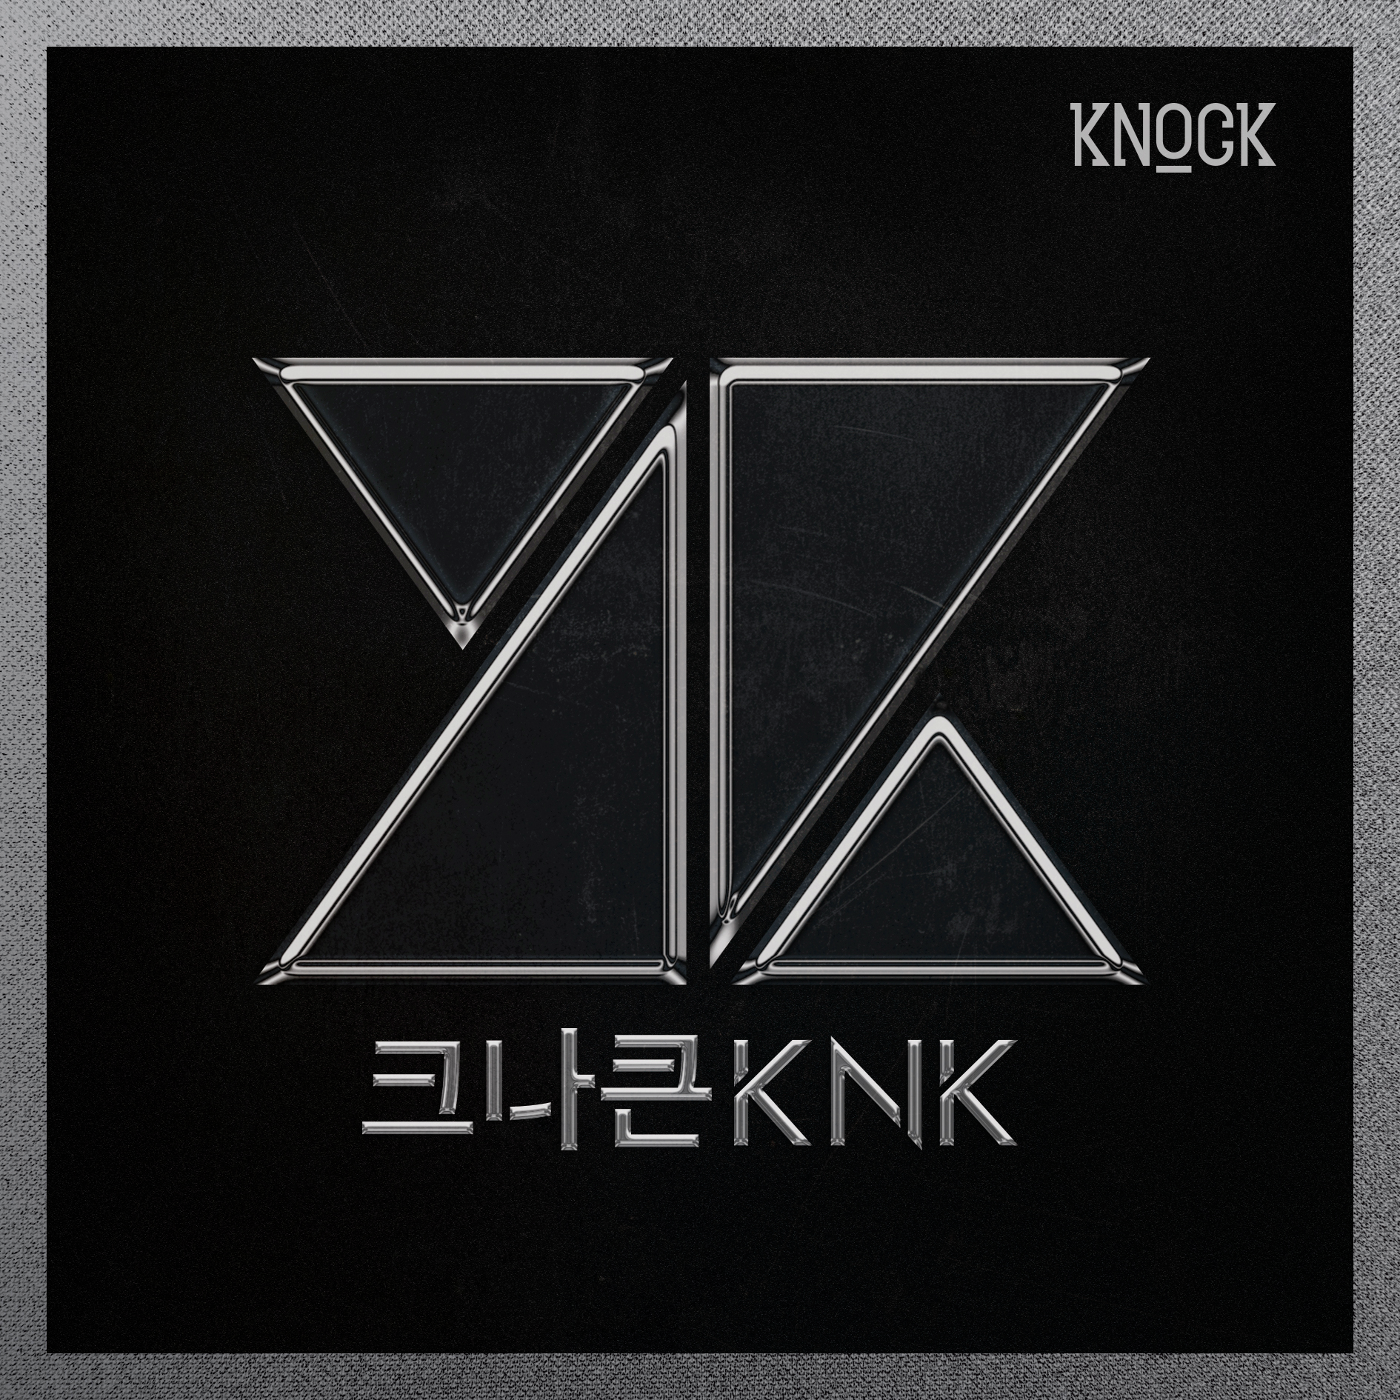 Image KNK Knock Coverpng Kpop Wiki FANDOM Powered By Wikia